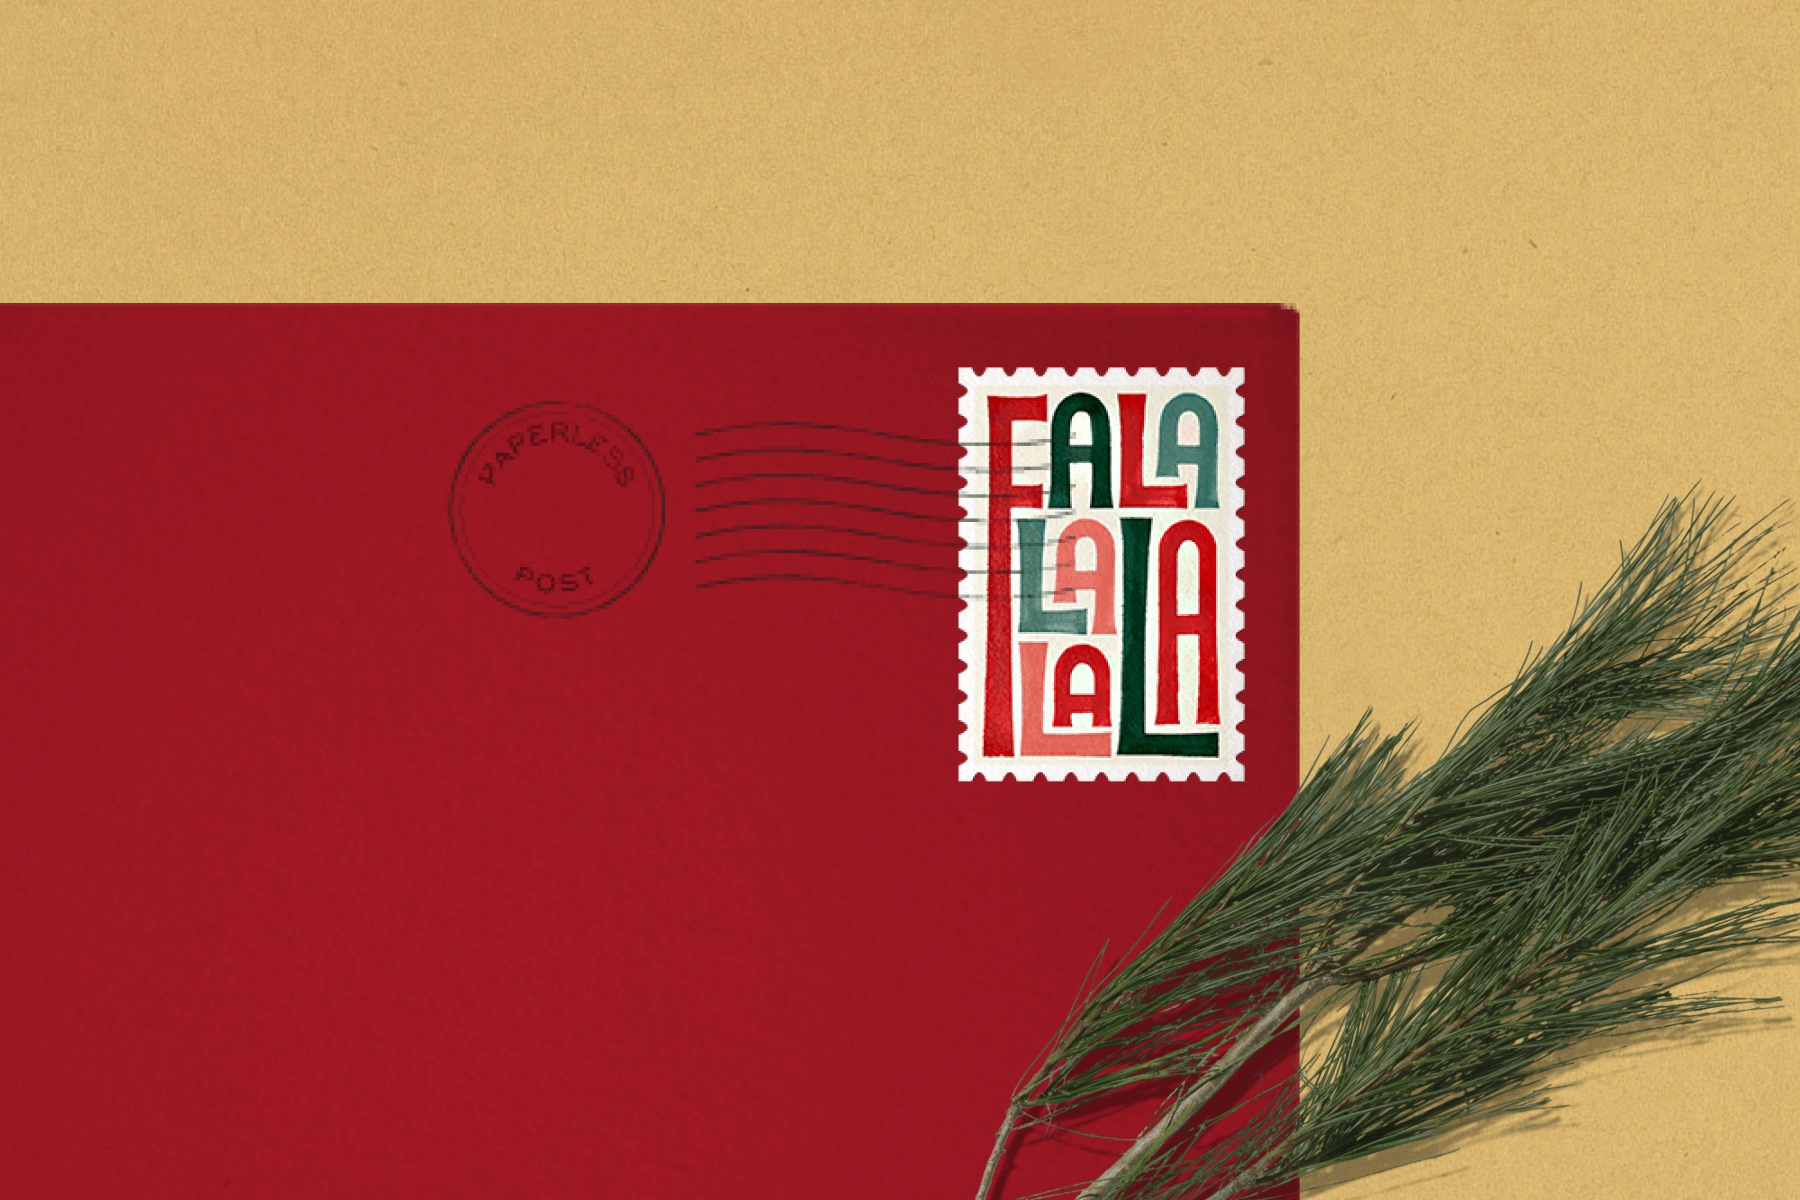 The corner of a red envelope with a white stamp that reads “FALALALA” and a sprig of pine across it.